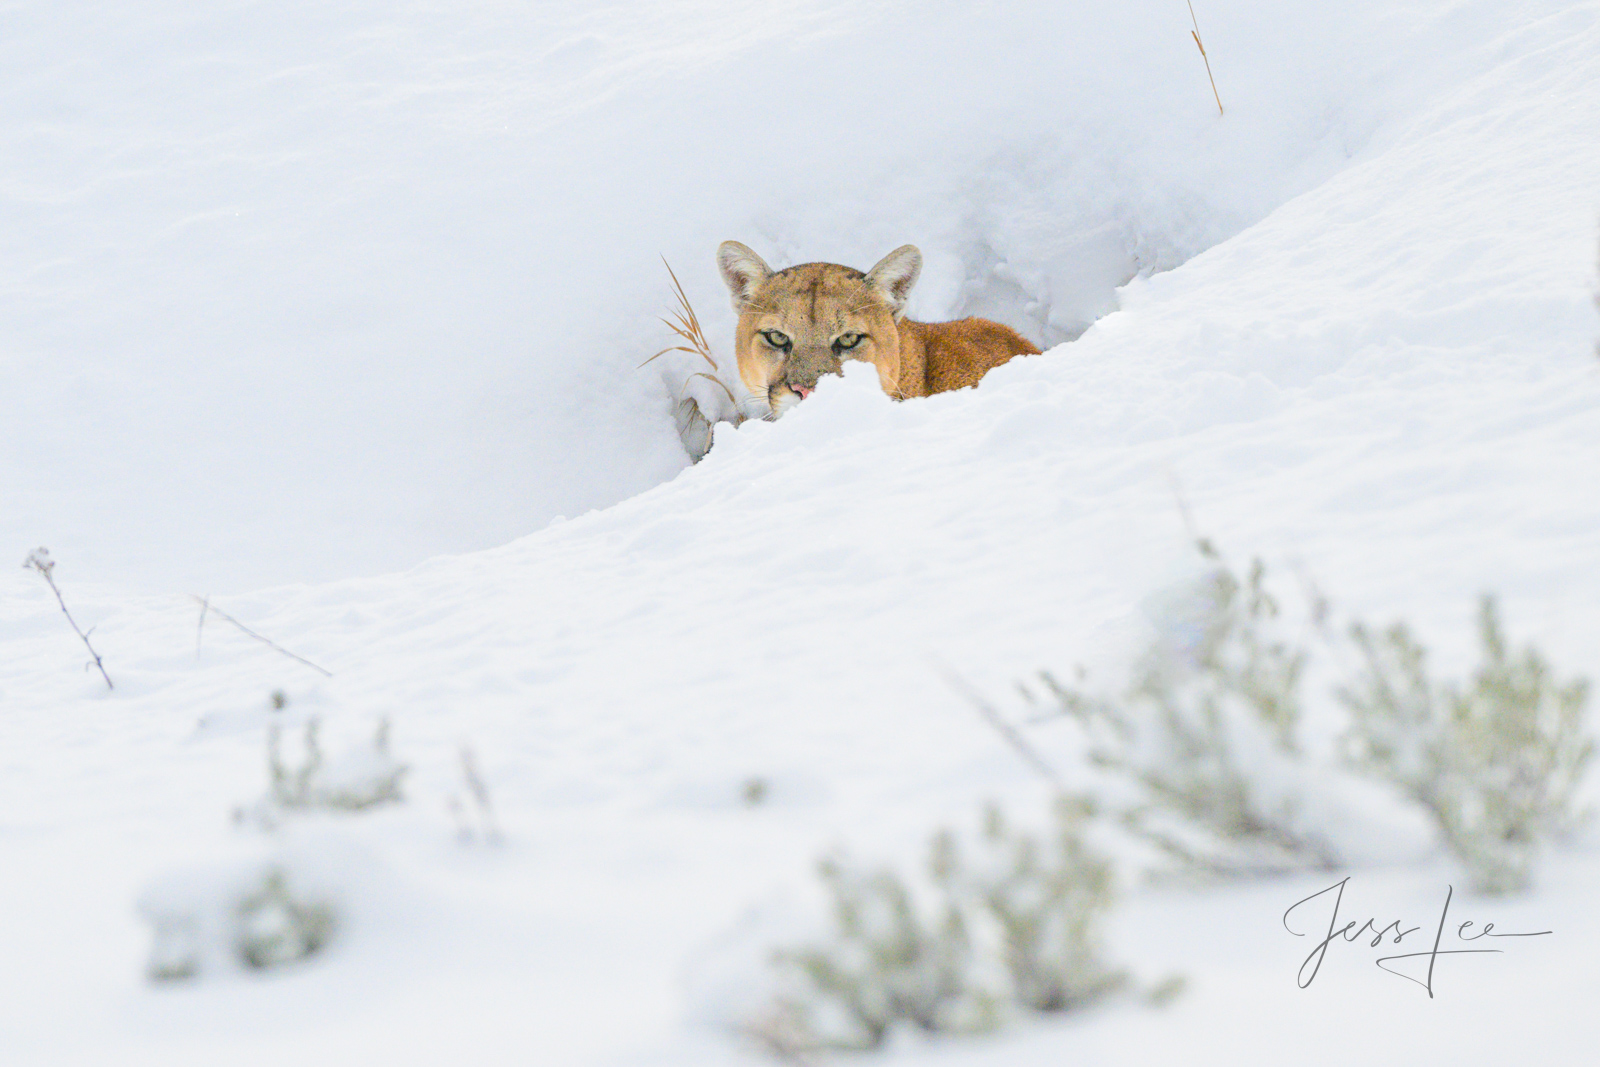 Mountain Lion Photo | Pictures taken in the wild by a chance encounter with a Cougar while searching for iconic western North...